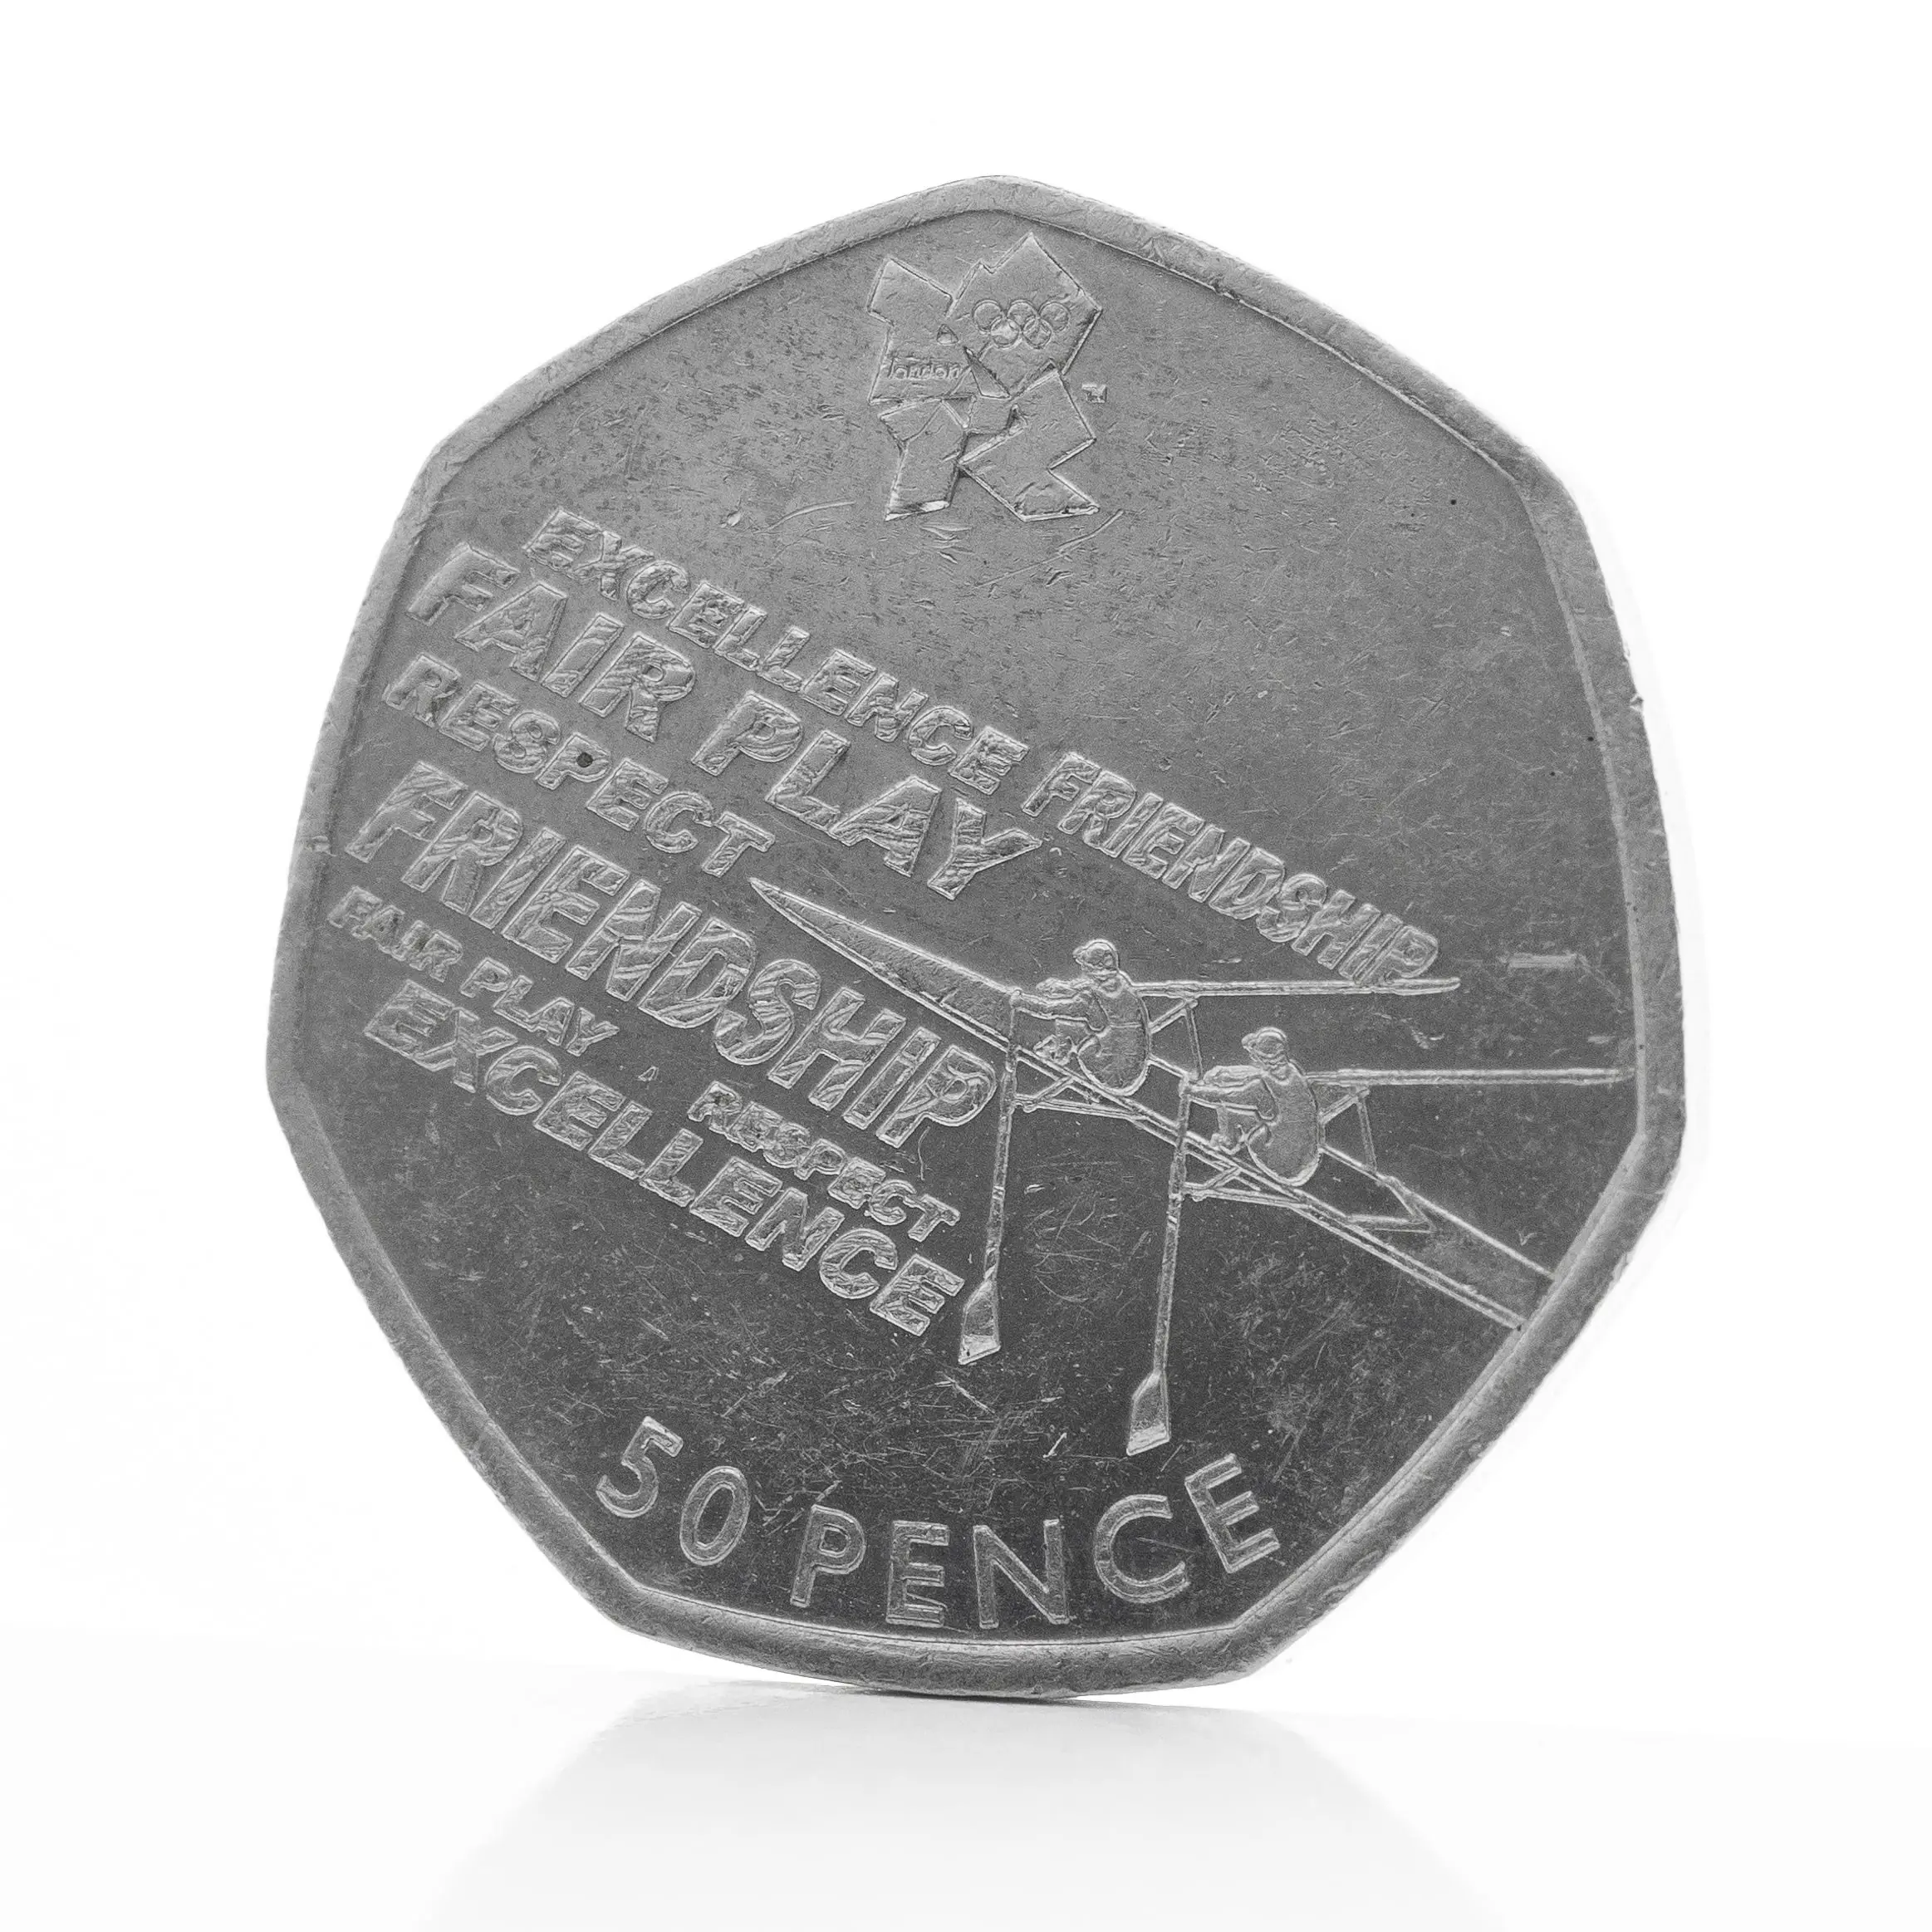 Reverse Design of the Rowing 50p Coin